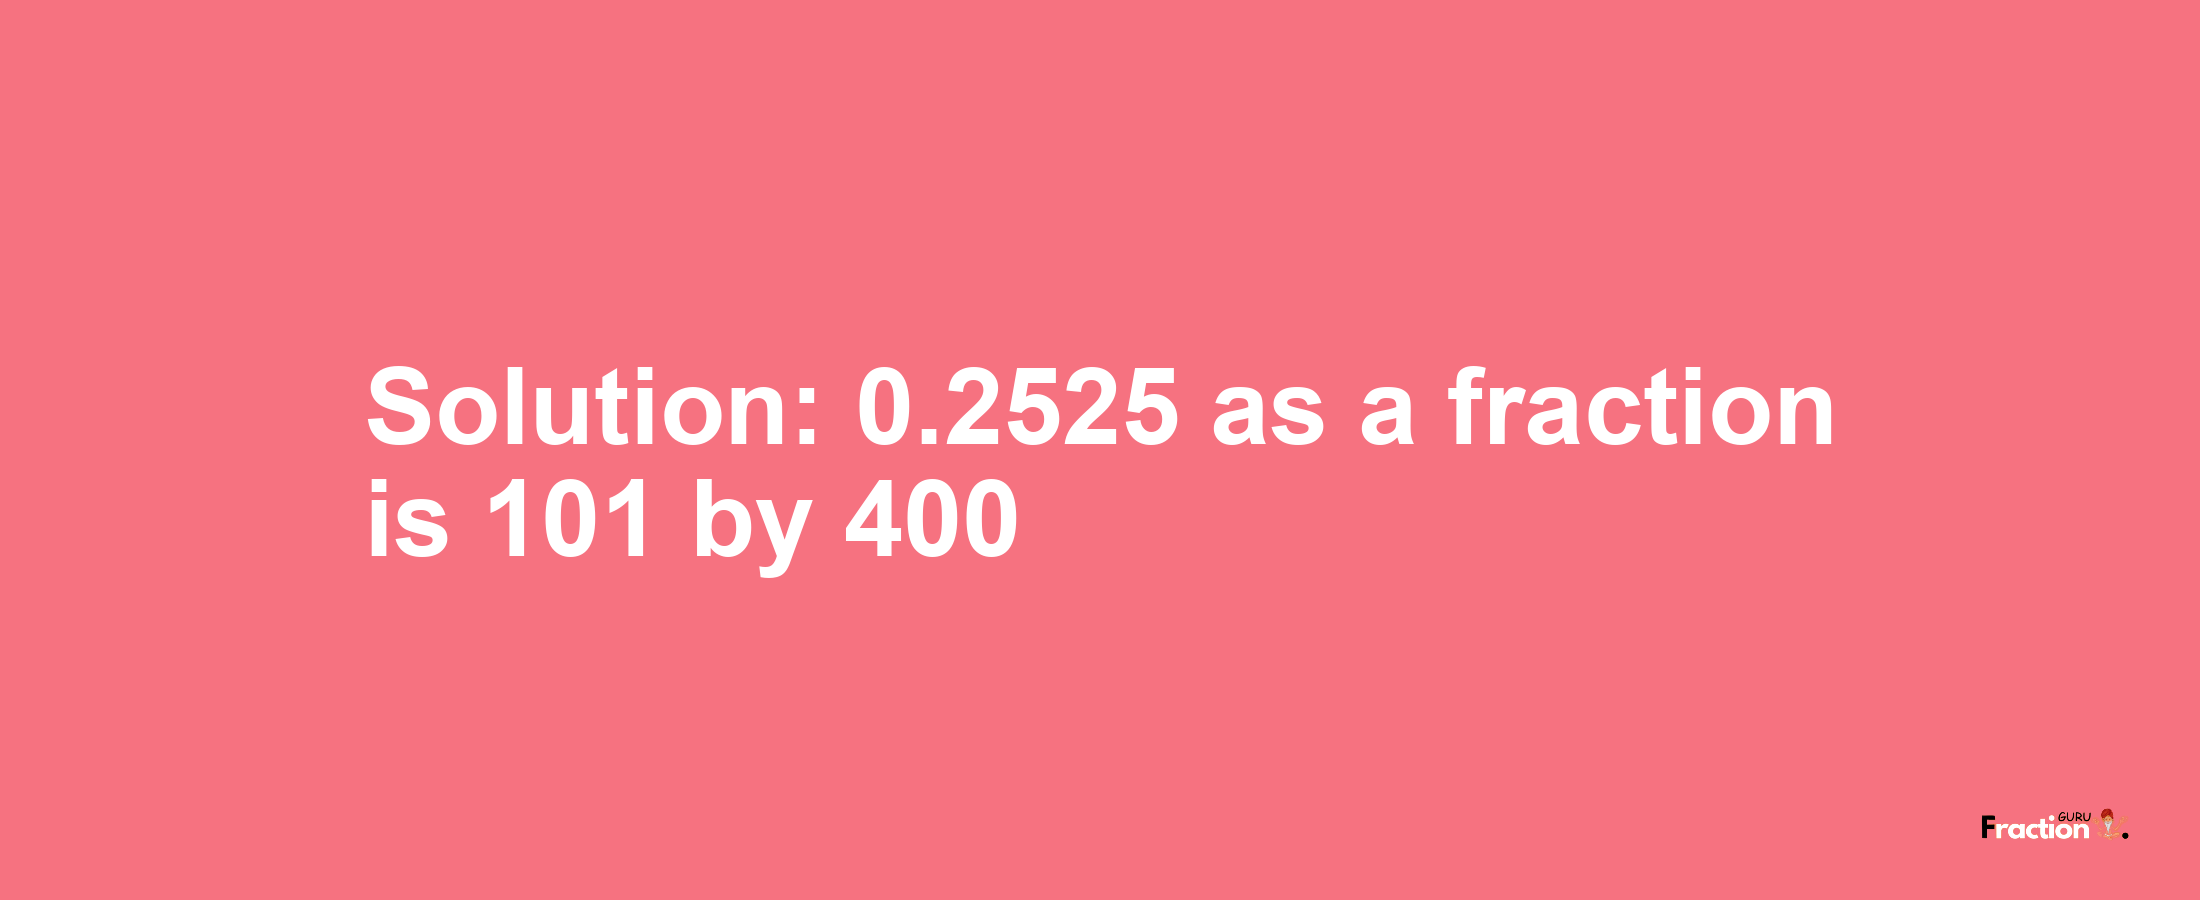 Solution:0.2525 as a fraction is 101/400